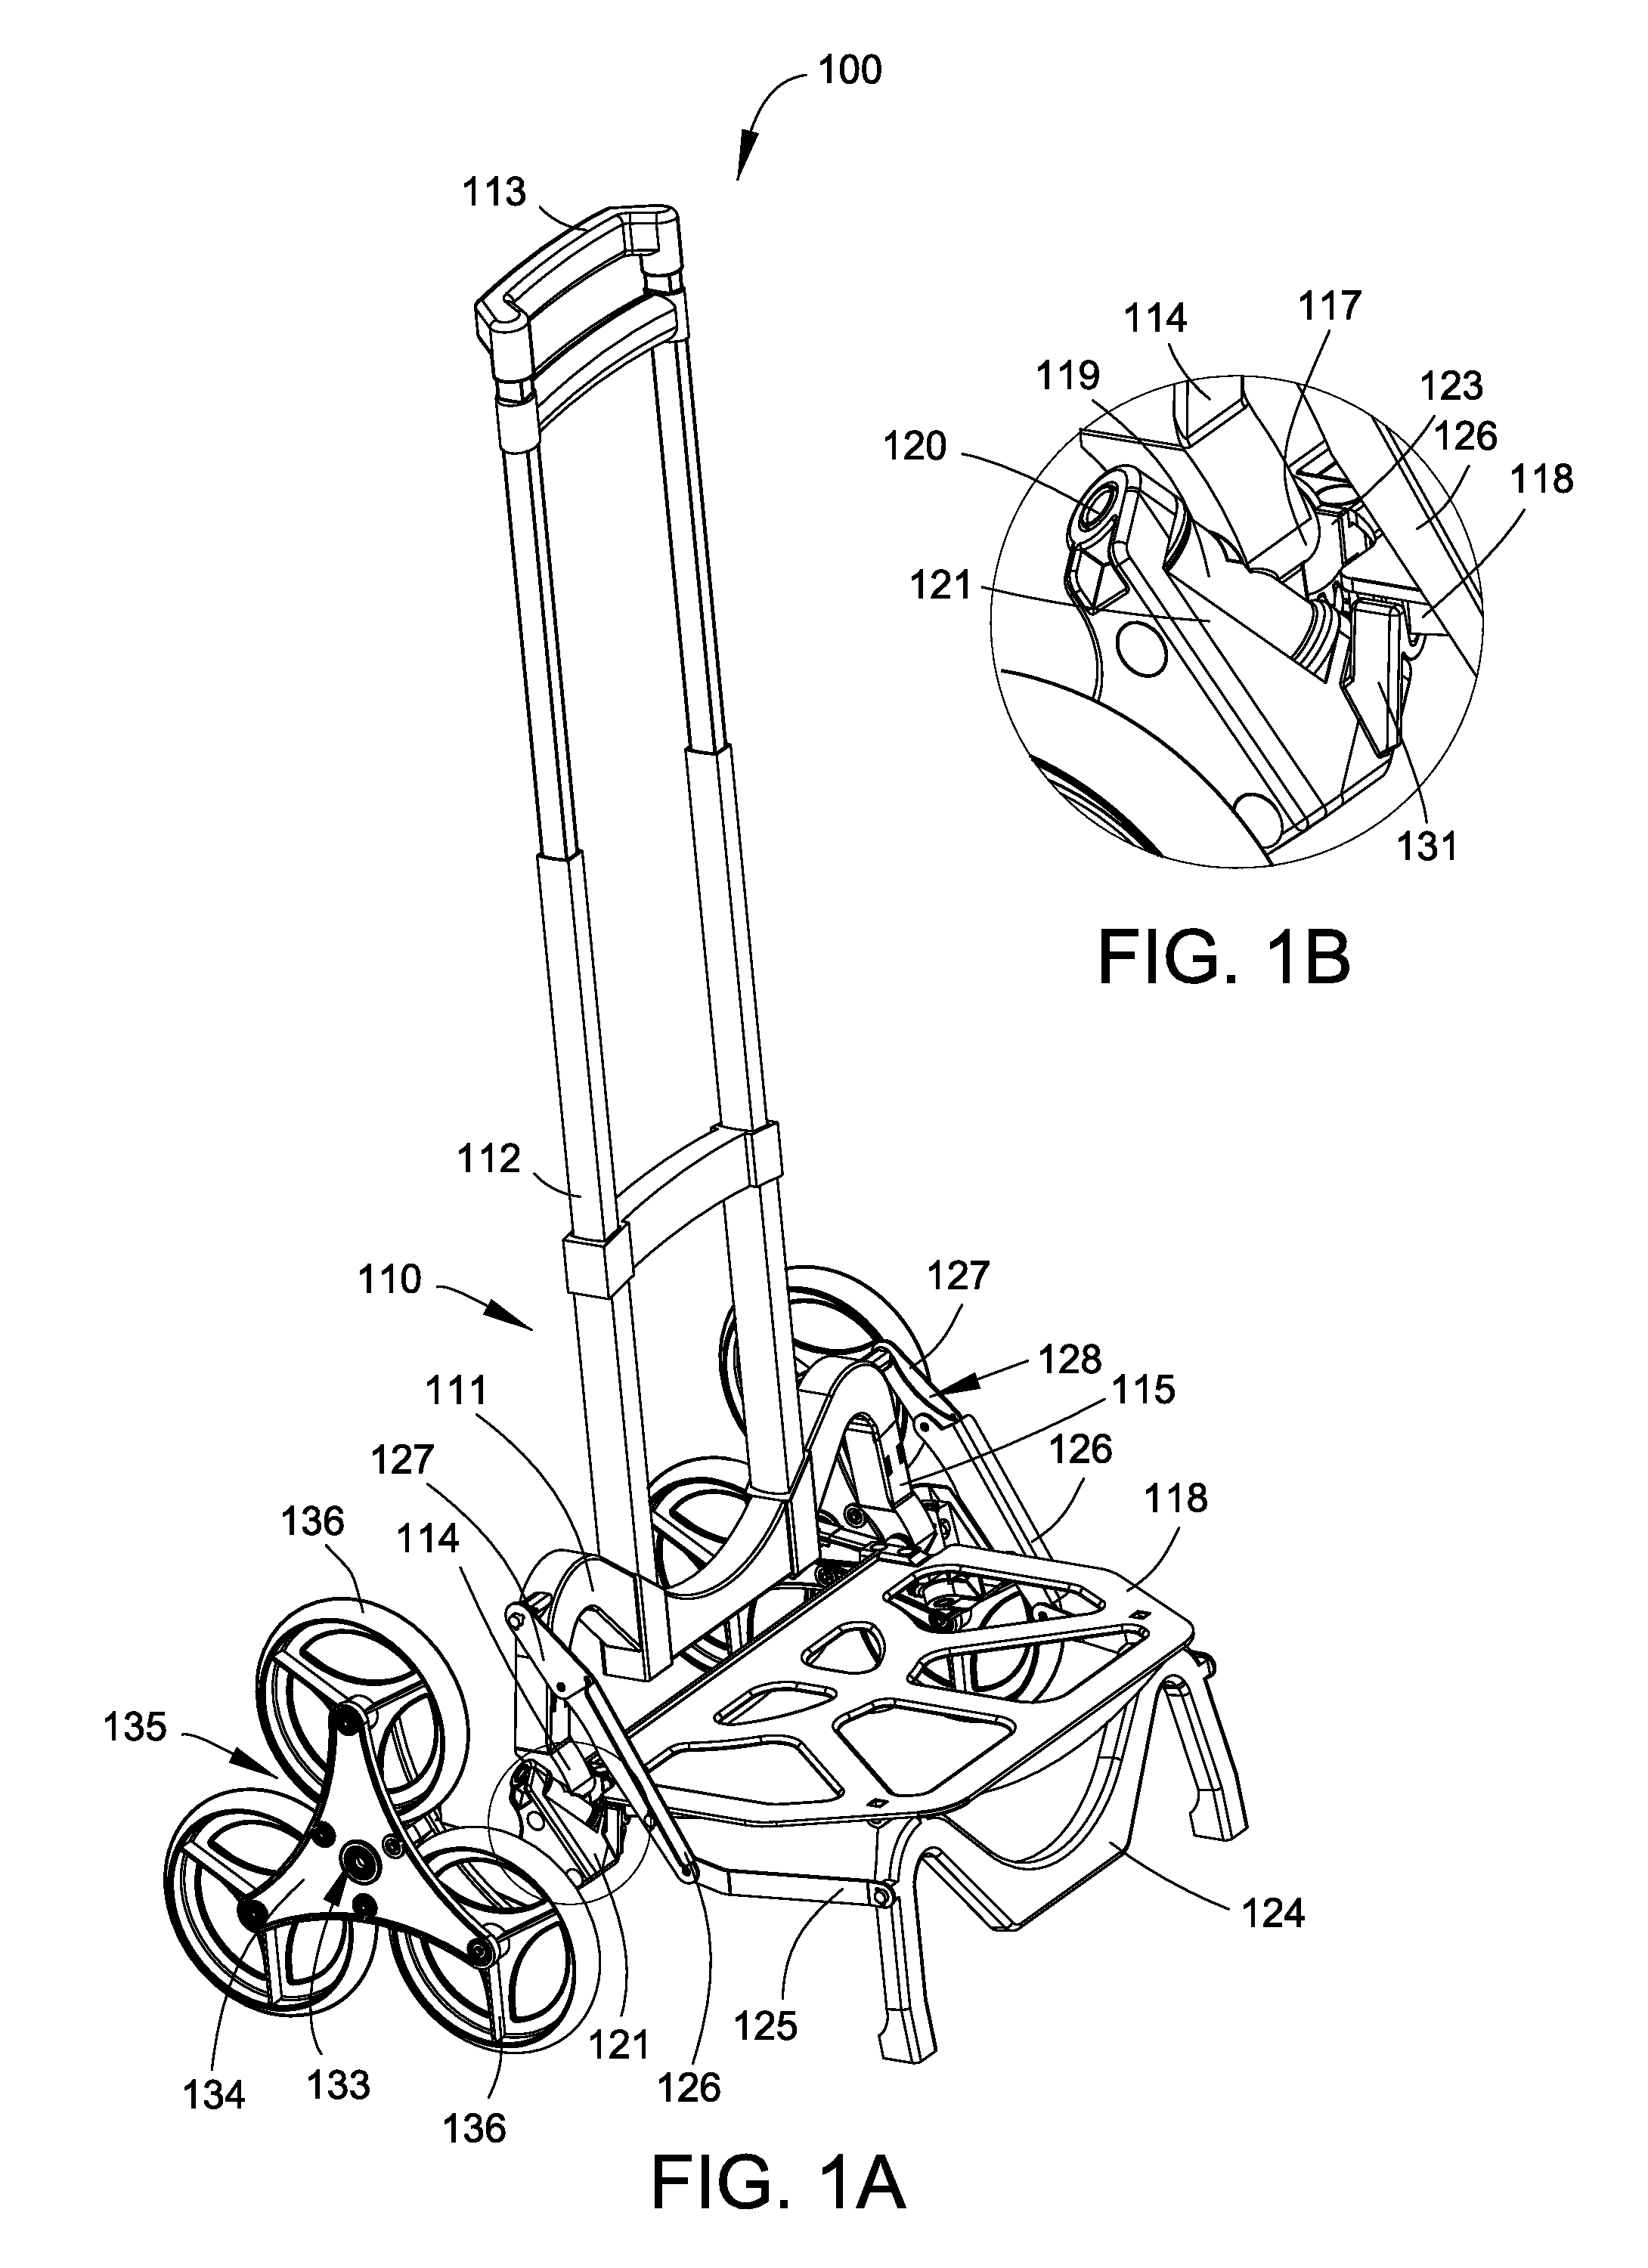 Folding chassis for manually driven carrier vehicles capable of traversing obstacles